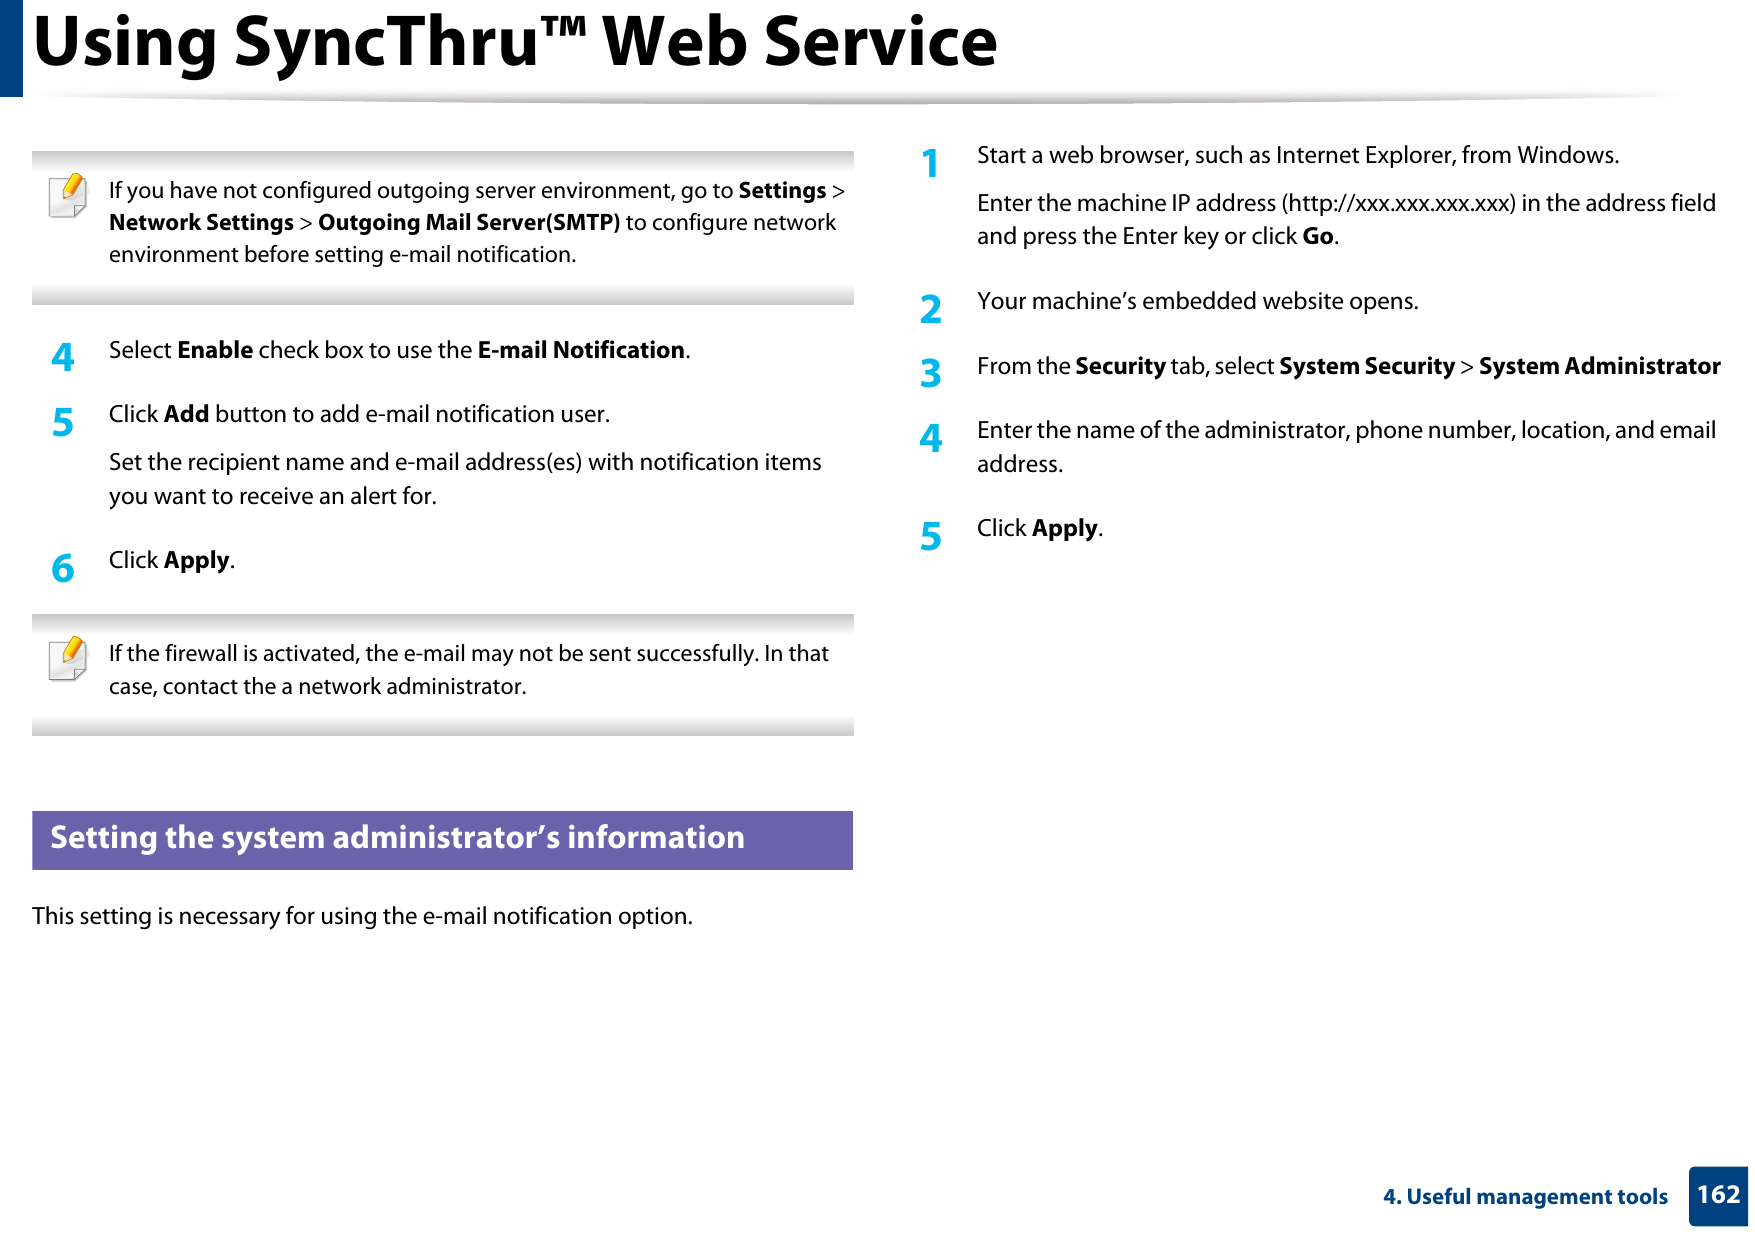 Using SyncThru™ Web Service1624. Useful management tools If you have not configured outgoing server environment, go to Settings &gt; Network Settings &gt; Outgoing Mail Server(SMTP) to configure network environment before setting e-mail notification.  4  Select Enable check box to use the E-mail Notification.5  Click Add button to add e-mail notification user. Set the recipient name and e-mail address(es) with notification items you want to receive an alert for.6  Click Apply. If the firewall is activated, the e-mail may not be sent successfully. In that case, contact the a network administrator. 4 Setting the system administrator’s informationThis setting is necessary for using the e-mail notification option.1Start a web browser, such as Internet Explorer, from Windows.Enter the machine IP address (http://xxx.xxx.xxx.xxx) in the address field and press the Enter key or click Go.2  Your machine’s embedded website opens.3  From the Security tab, select System Security &gt; System Administrator4  Enter the name of the administrator, phone number, location, and email address. 5  Click Apply. 